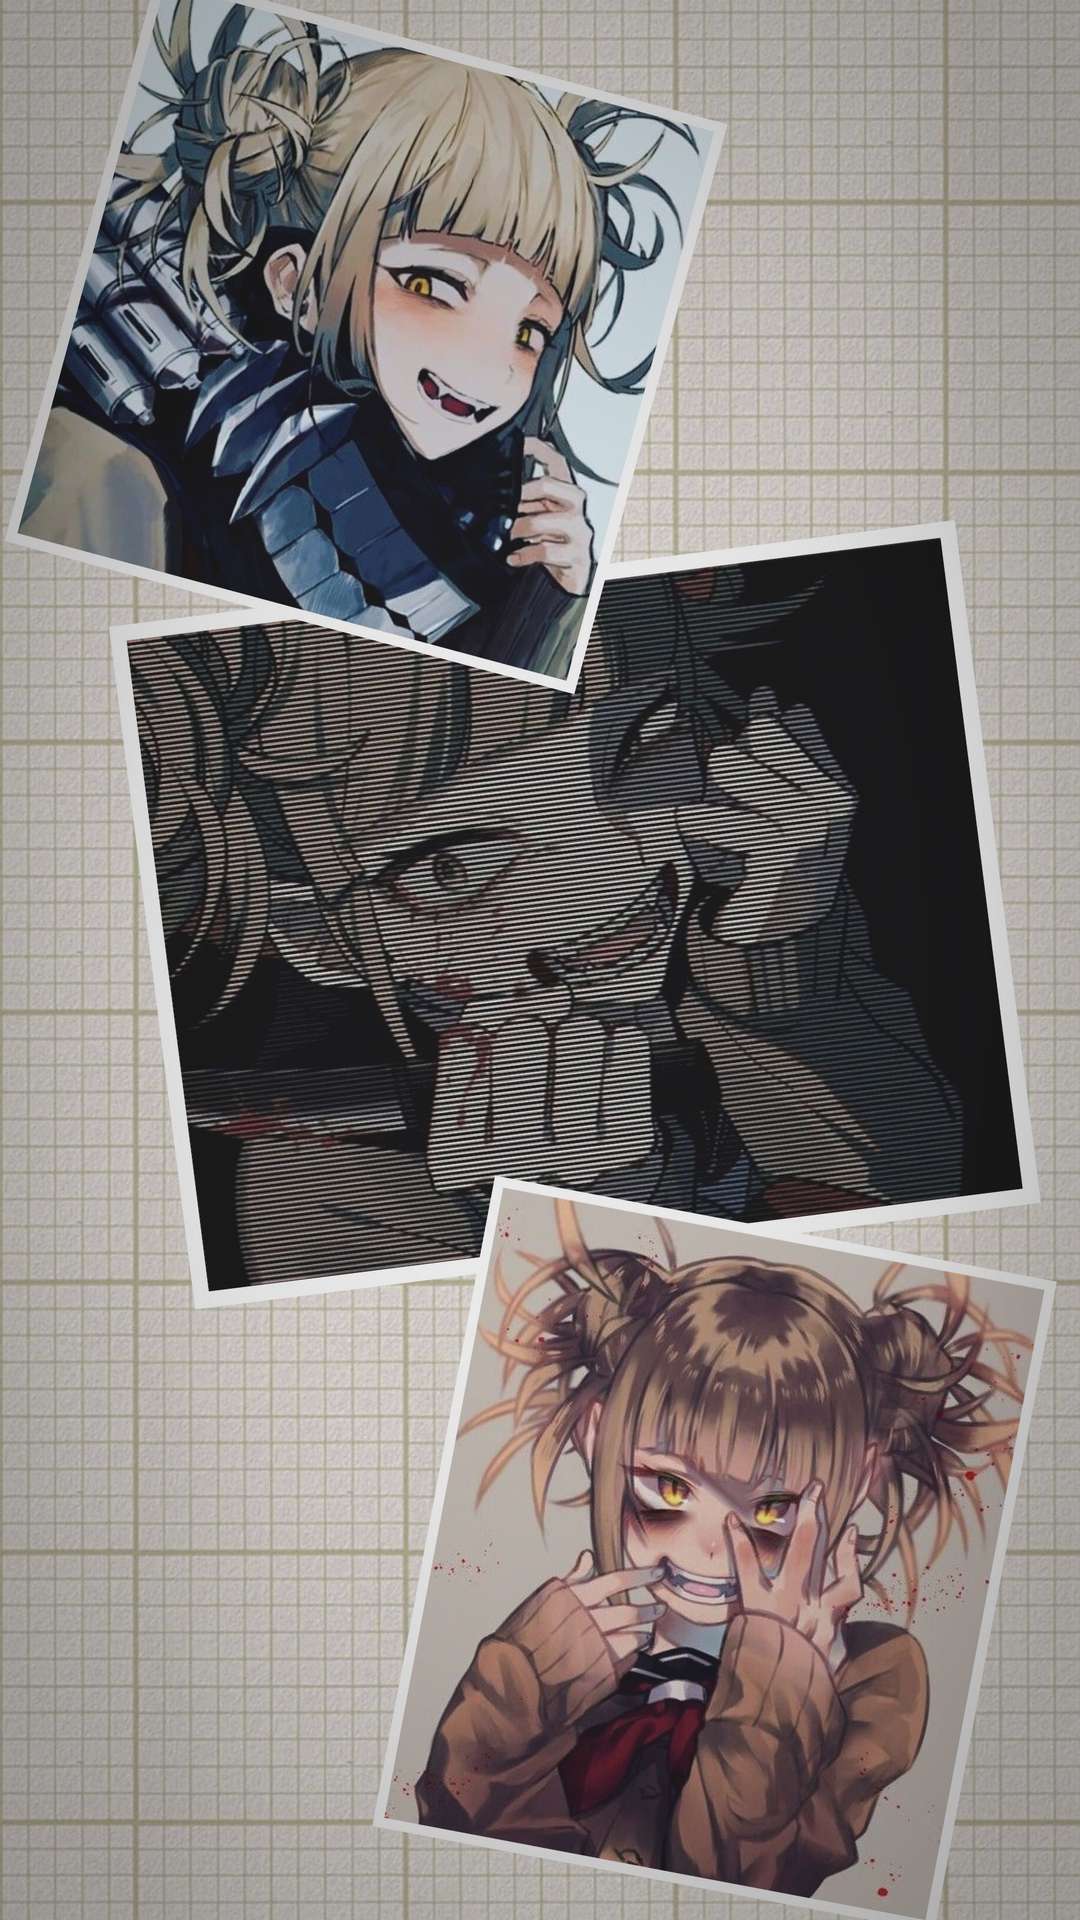 170 Himiko Toga HD Wallpapers and Backgrounds